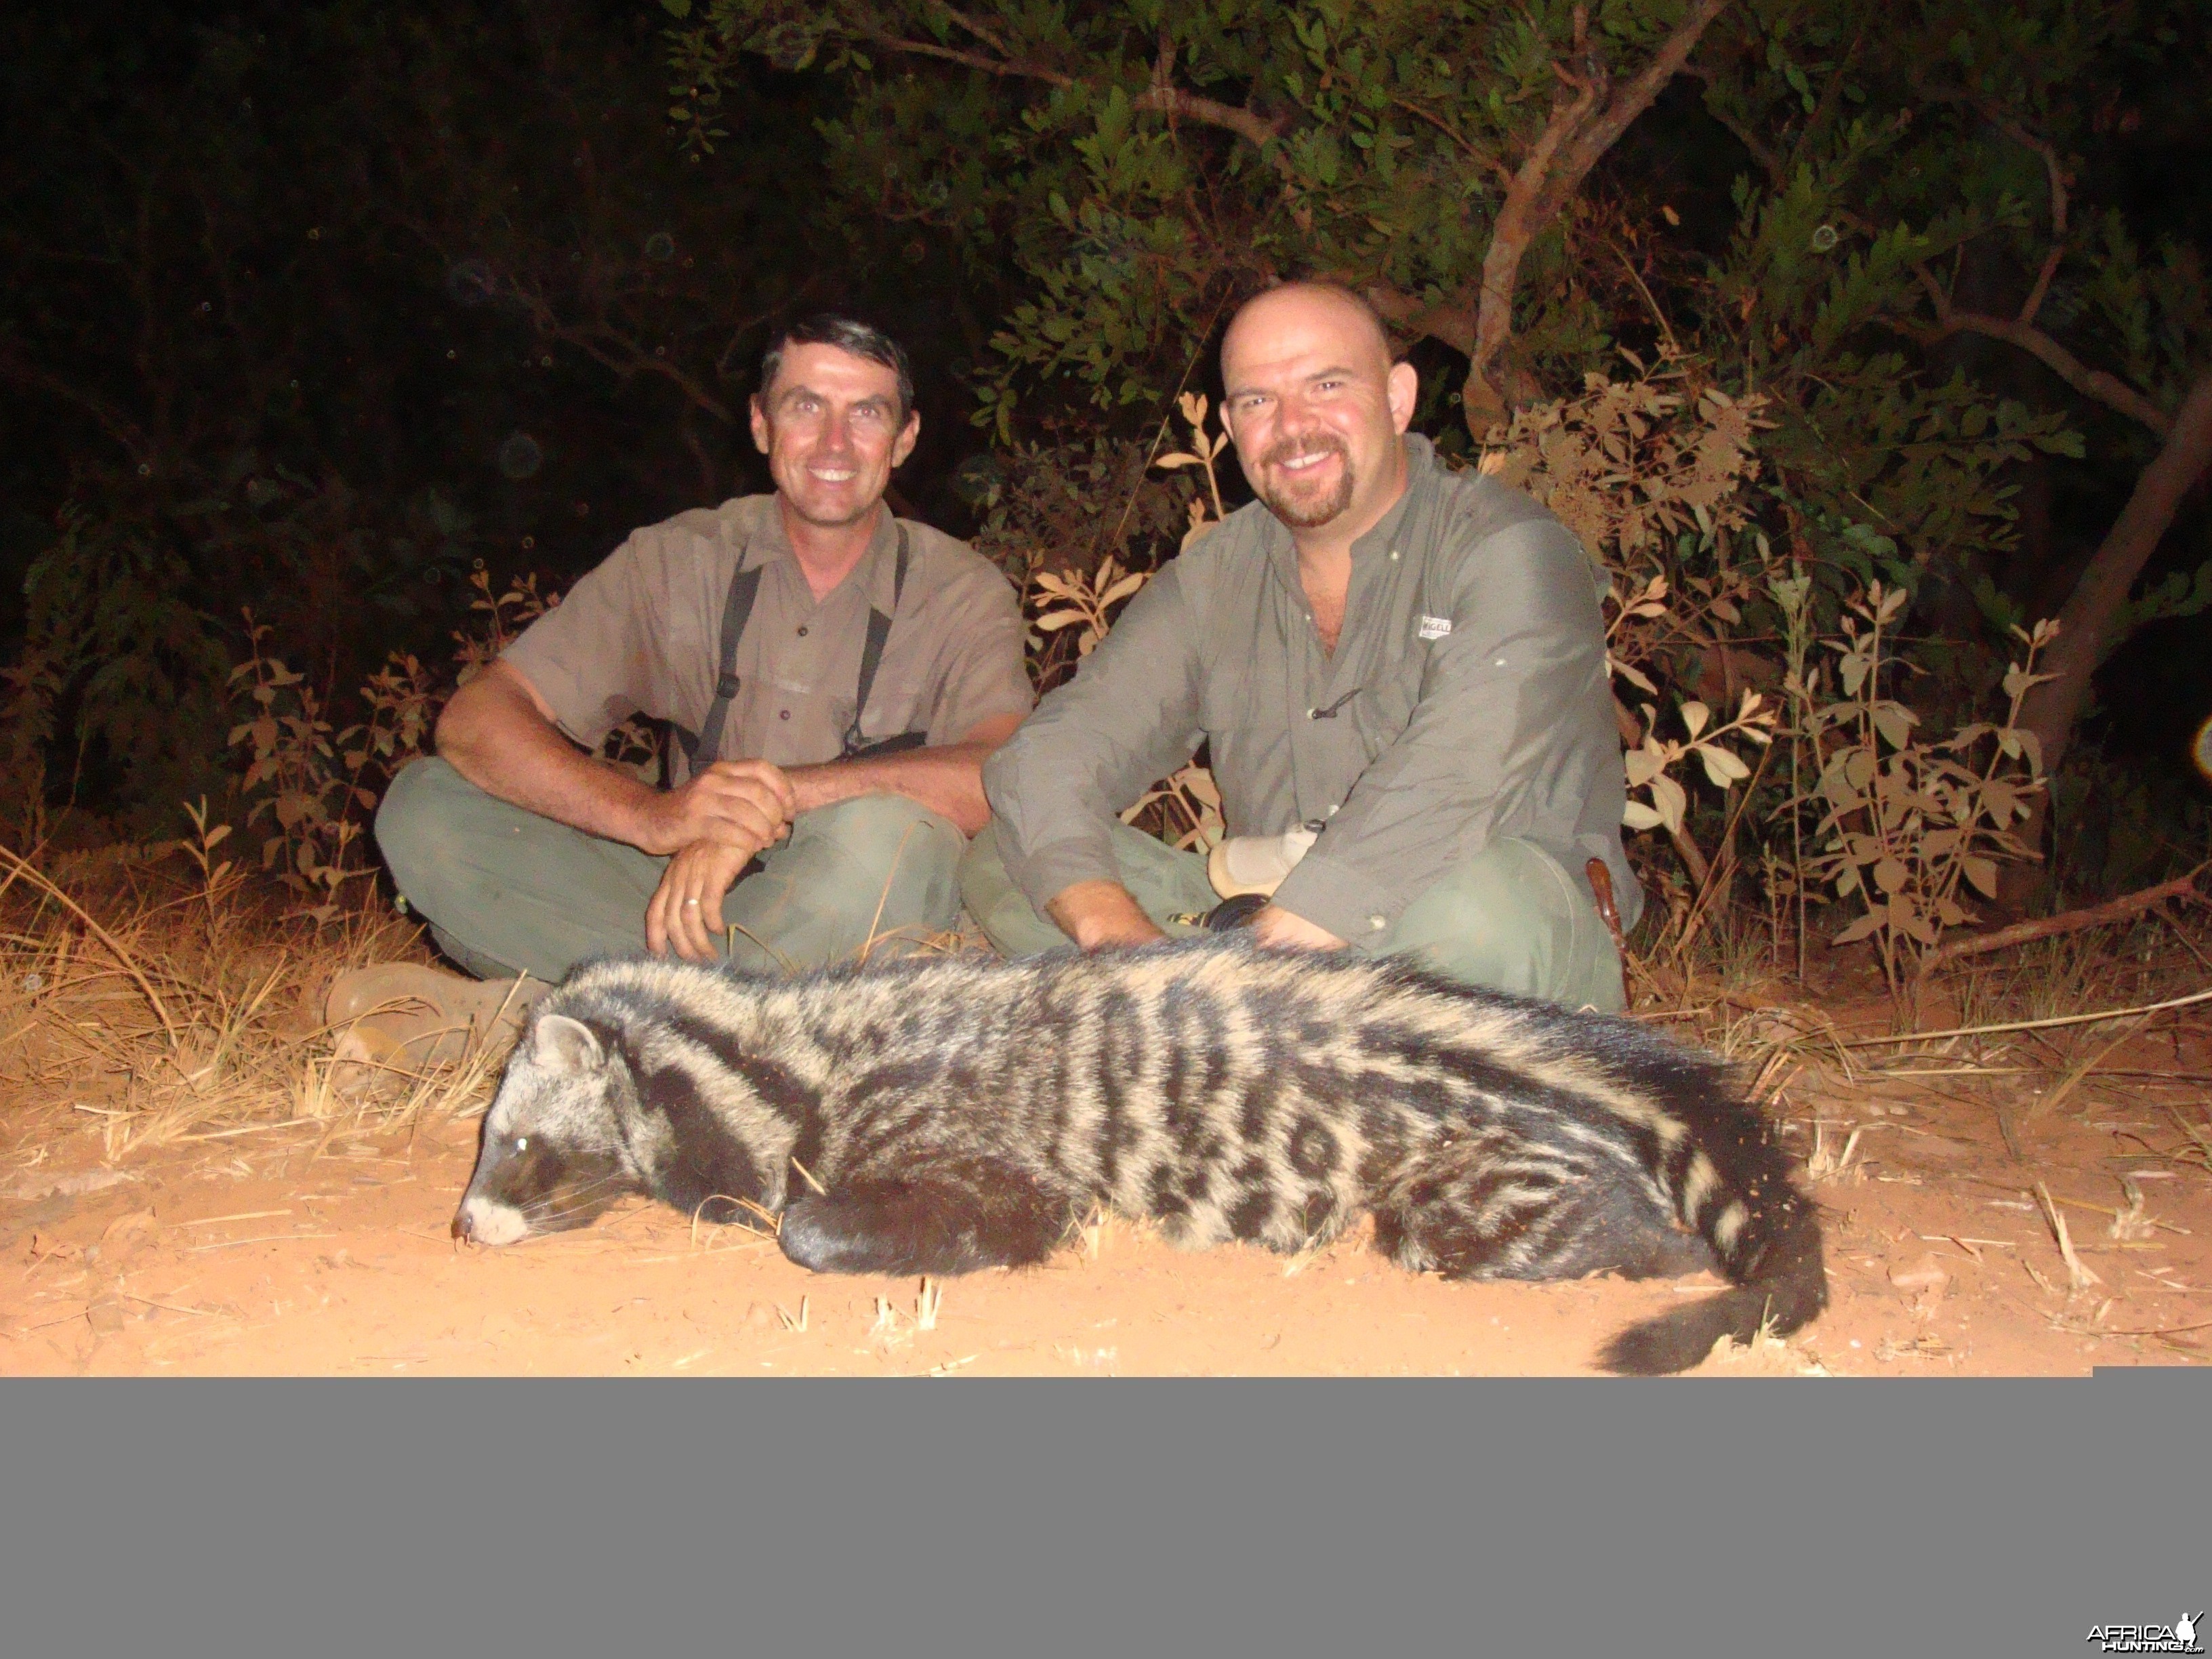 Civet Cat hunted in Central African Republic with CAWA